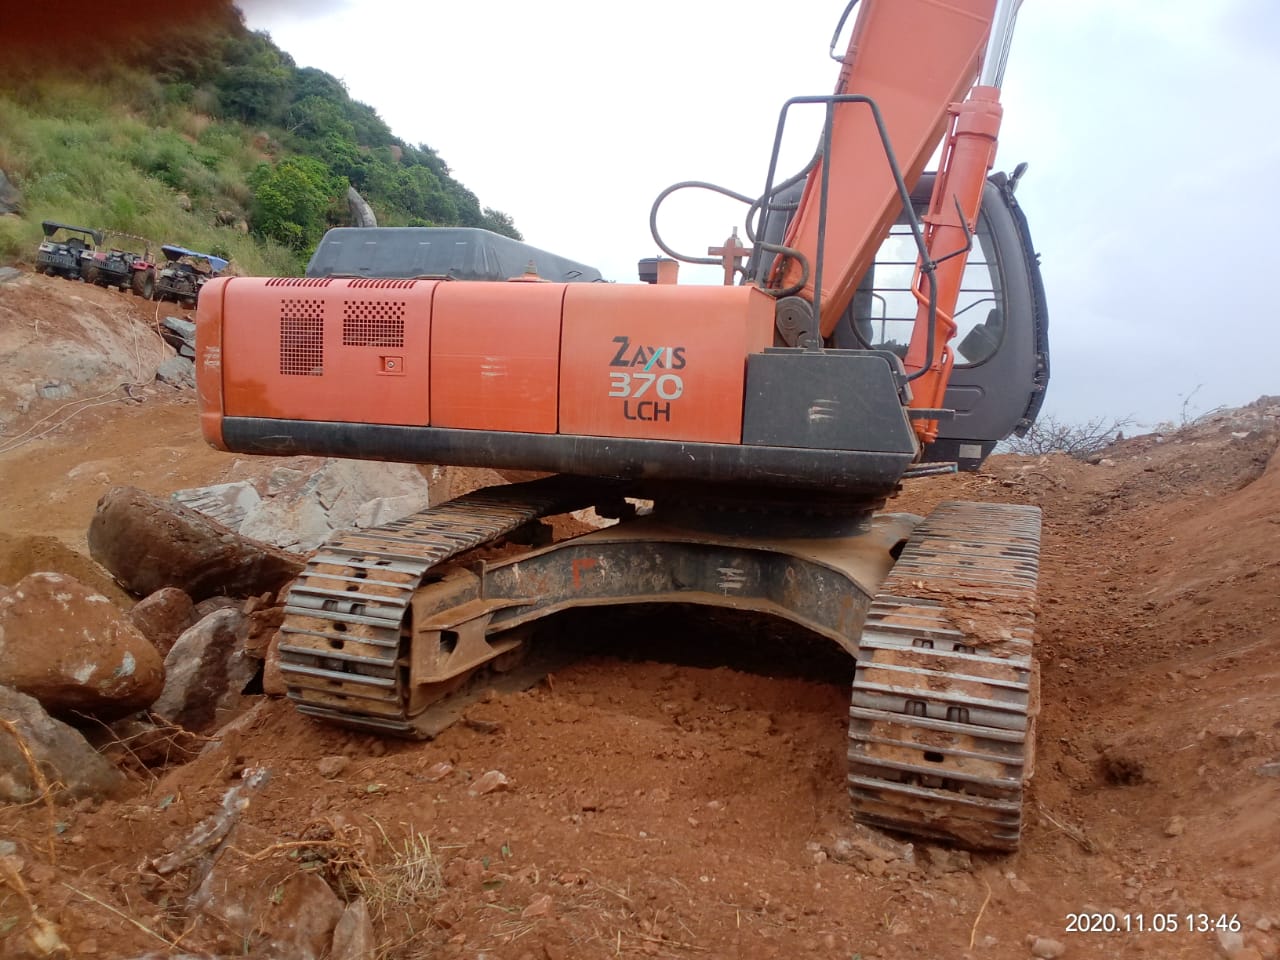 2015 model Used Tata Hitachi EX 370 Excavator for sale in TRICHY by owners online at best price, Product ID: 449898, Image 2- Infra Bazaar